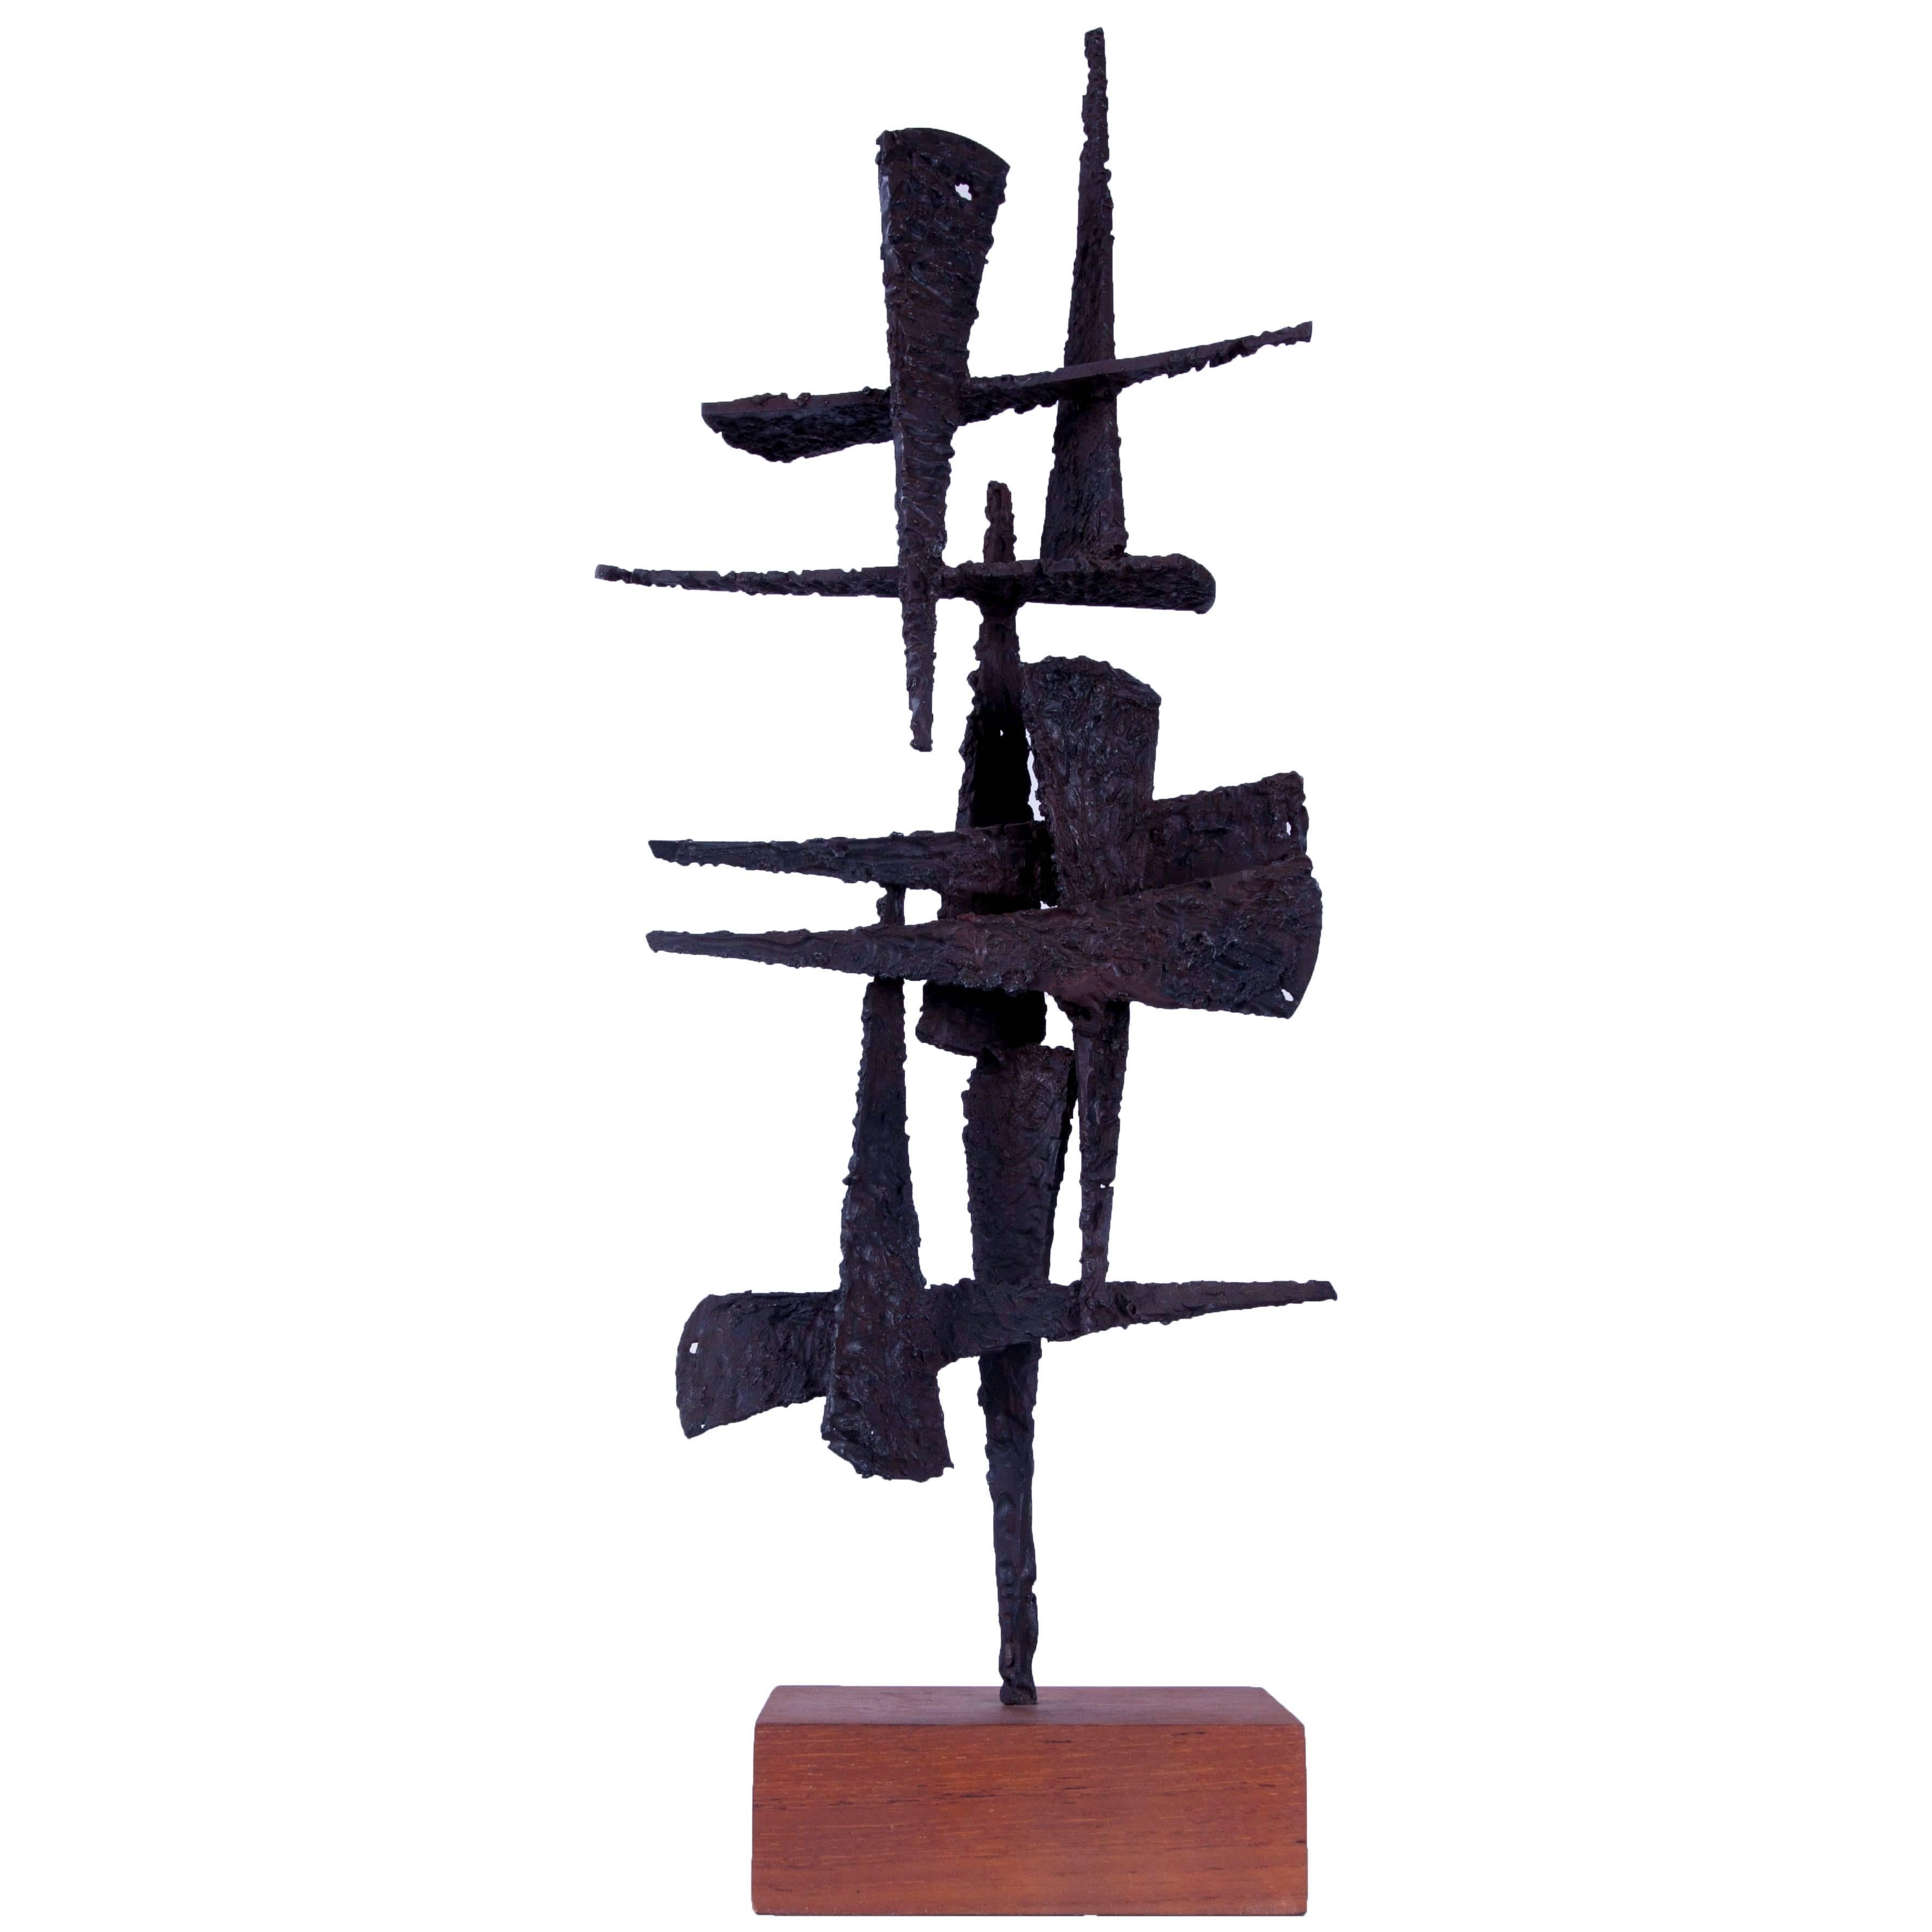 Contemporary Torch-Cut Steel Brutal Sculpture by American Artist Joey Vaiasuso